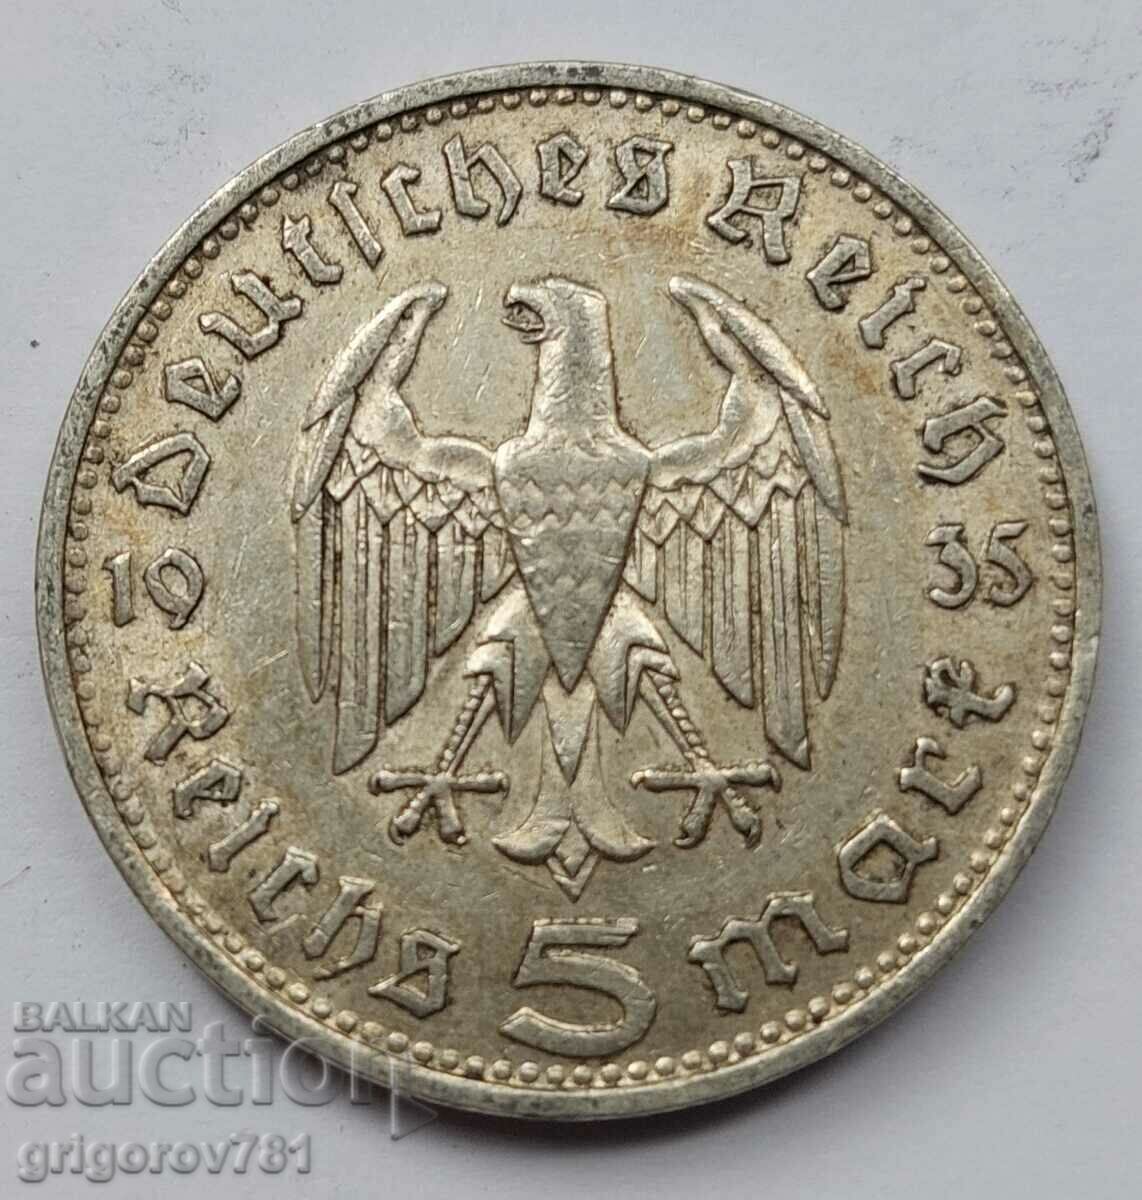 5 Mark Silver Germany 1935 D III Reich Silver Coin #69